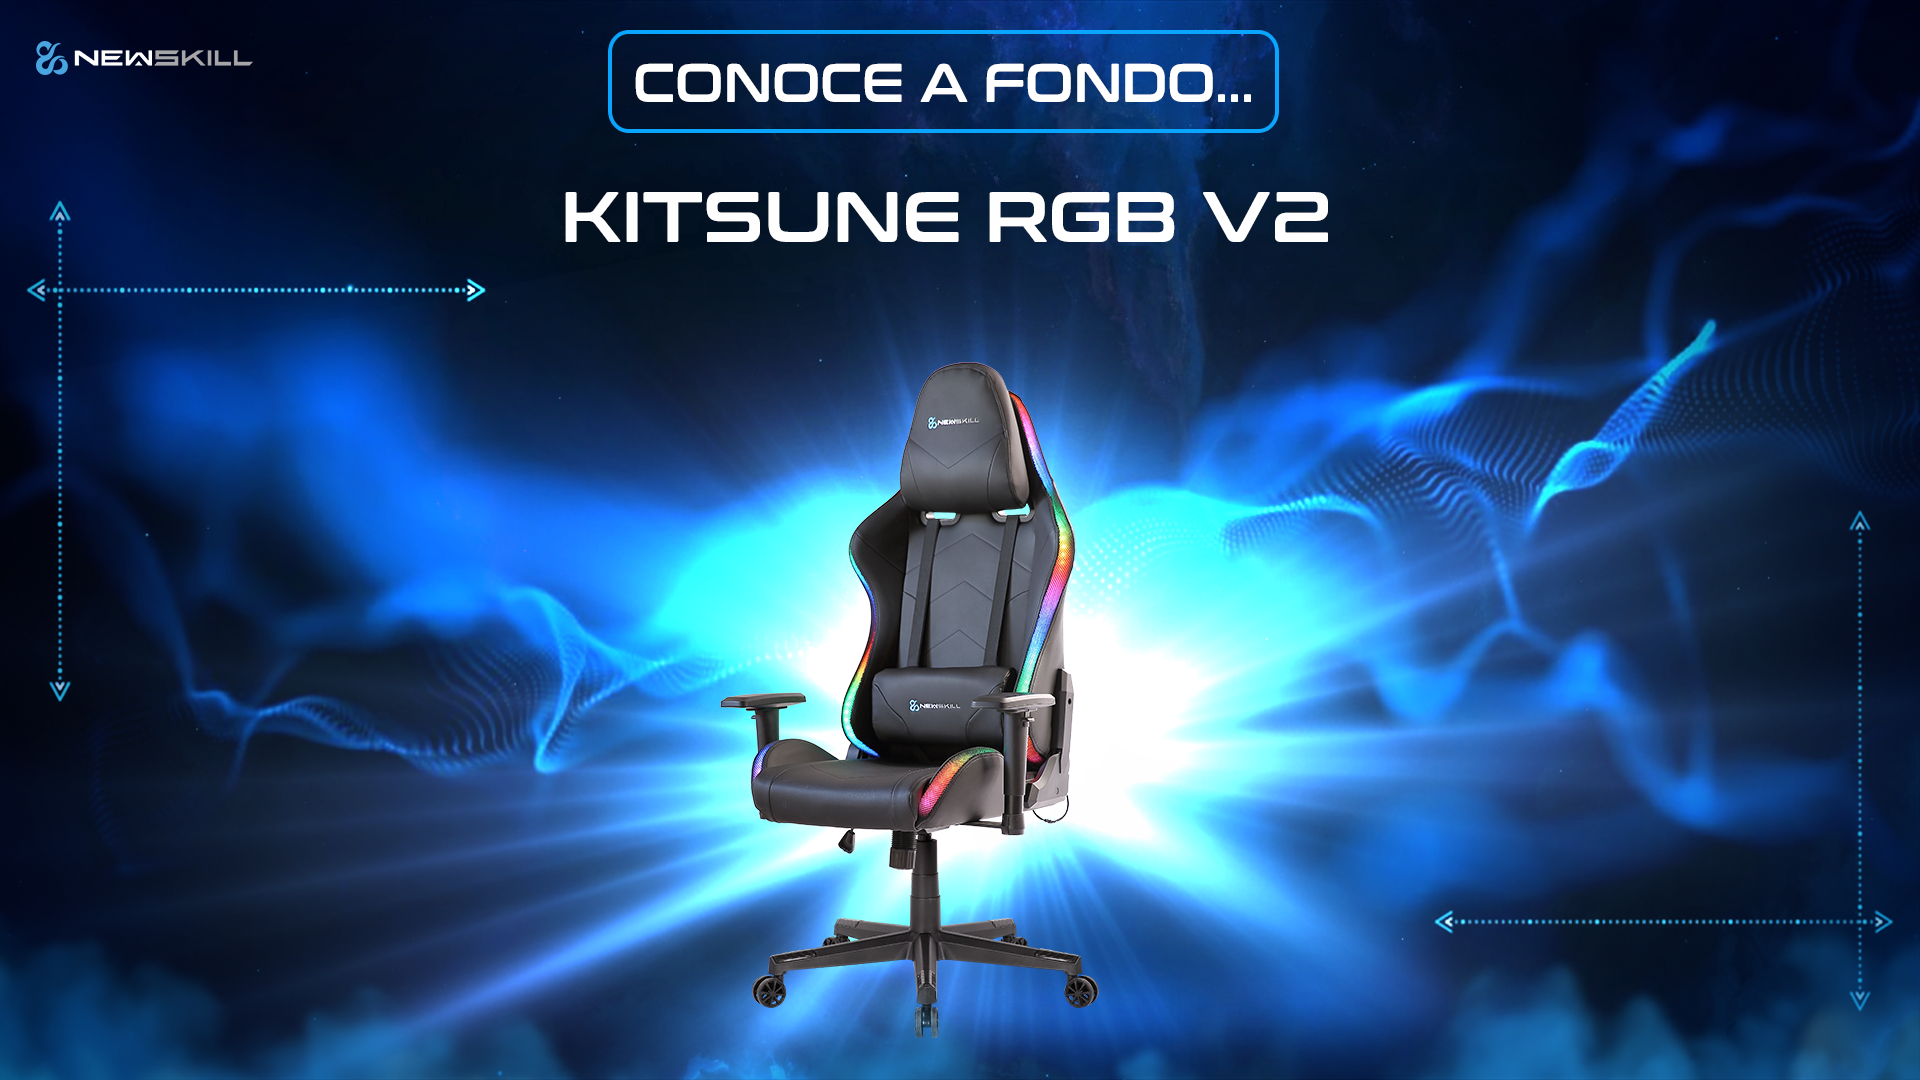 Discover Kitsune RGB V2: the definitive RGB gaming chair has arrived